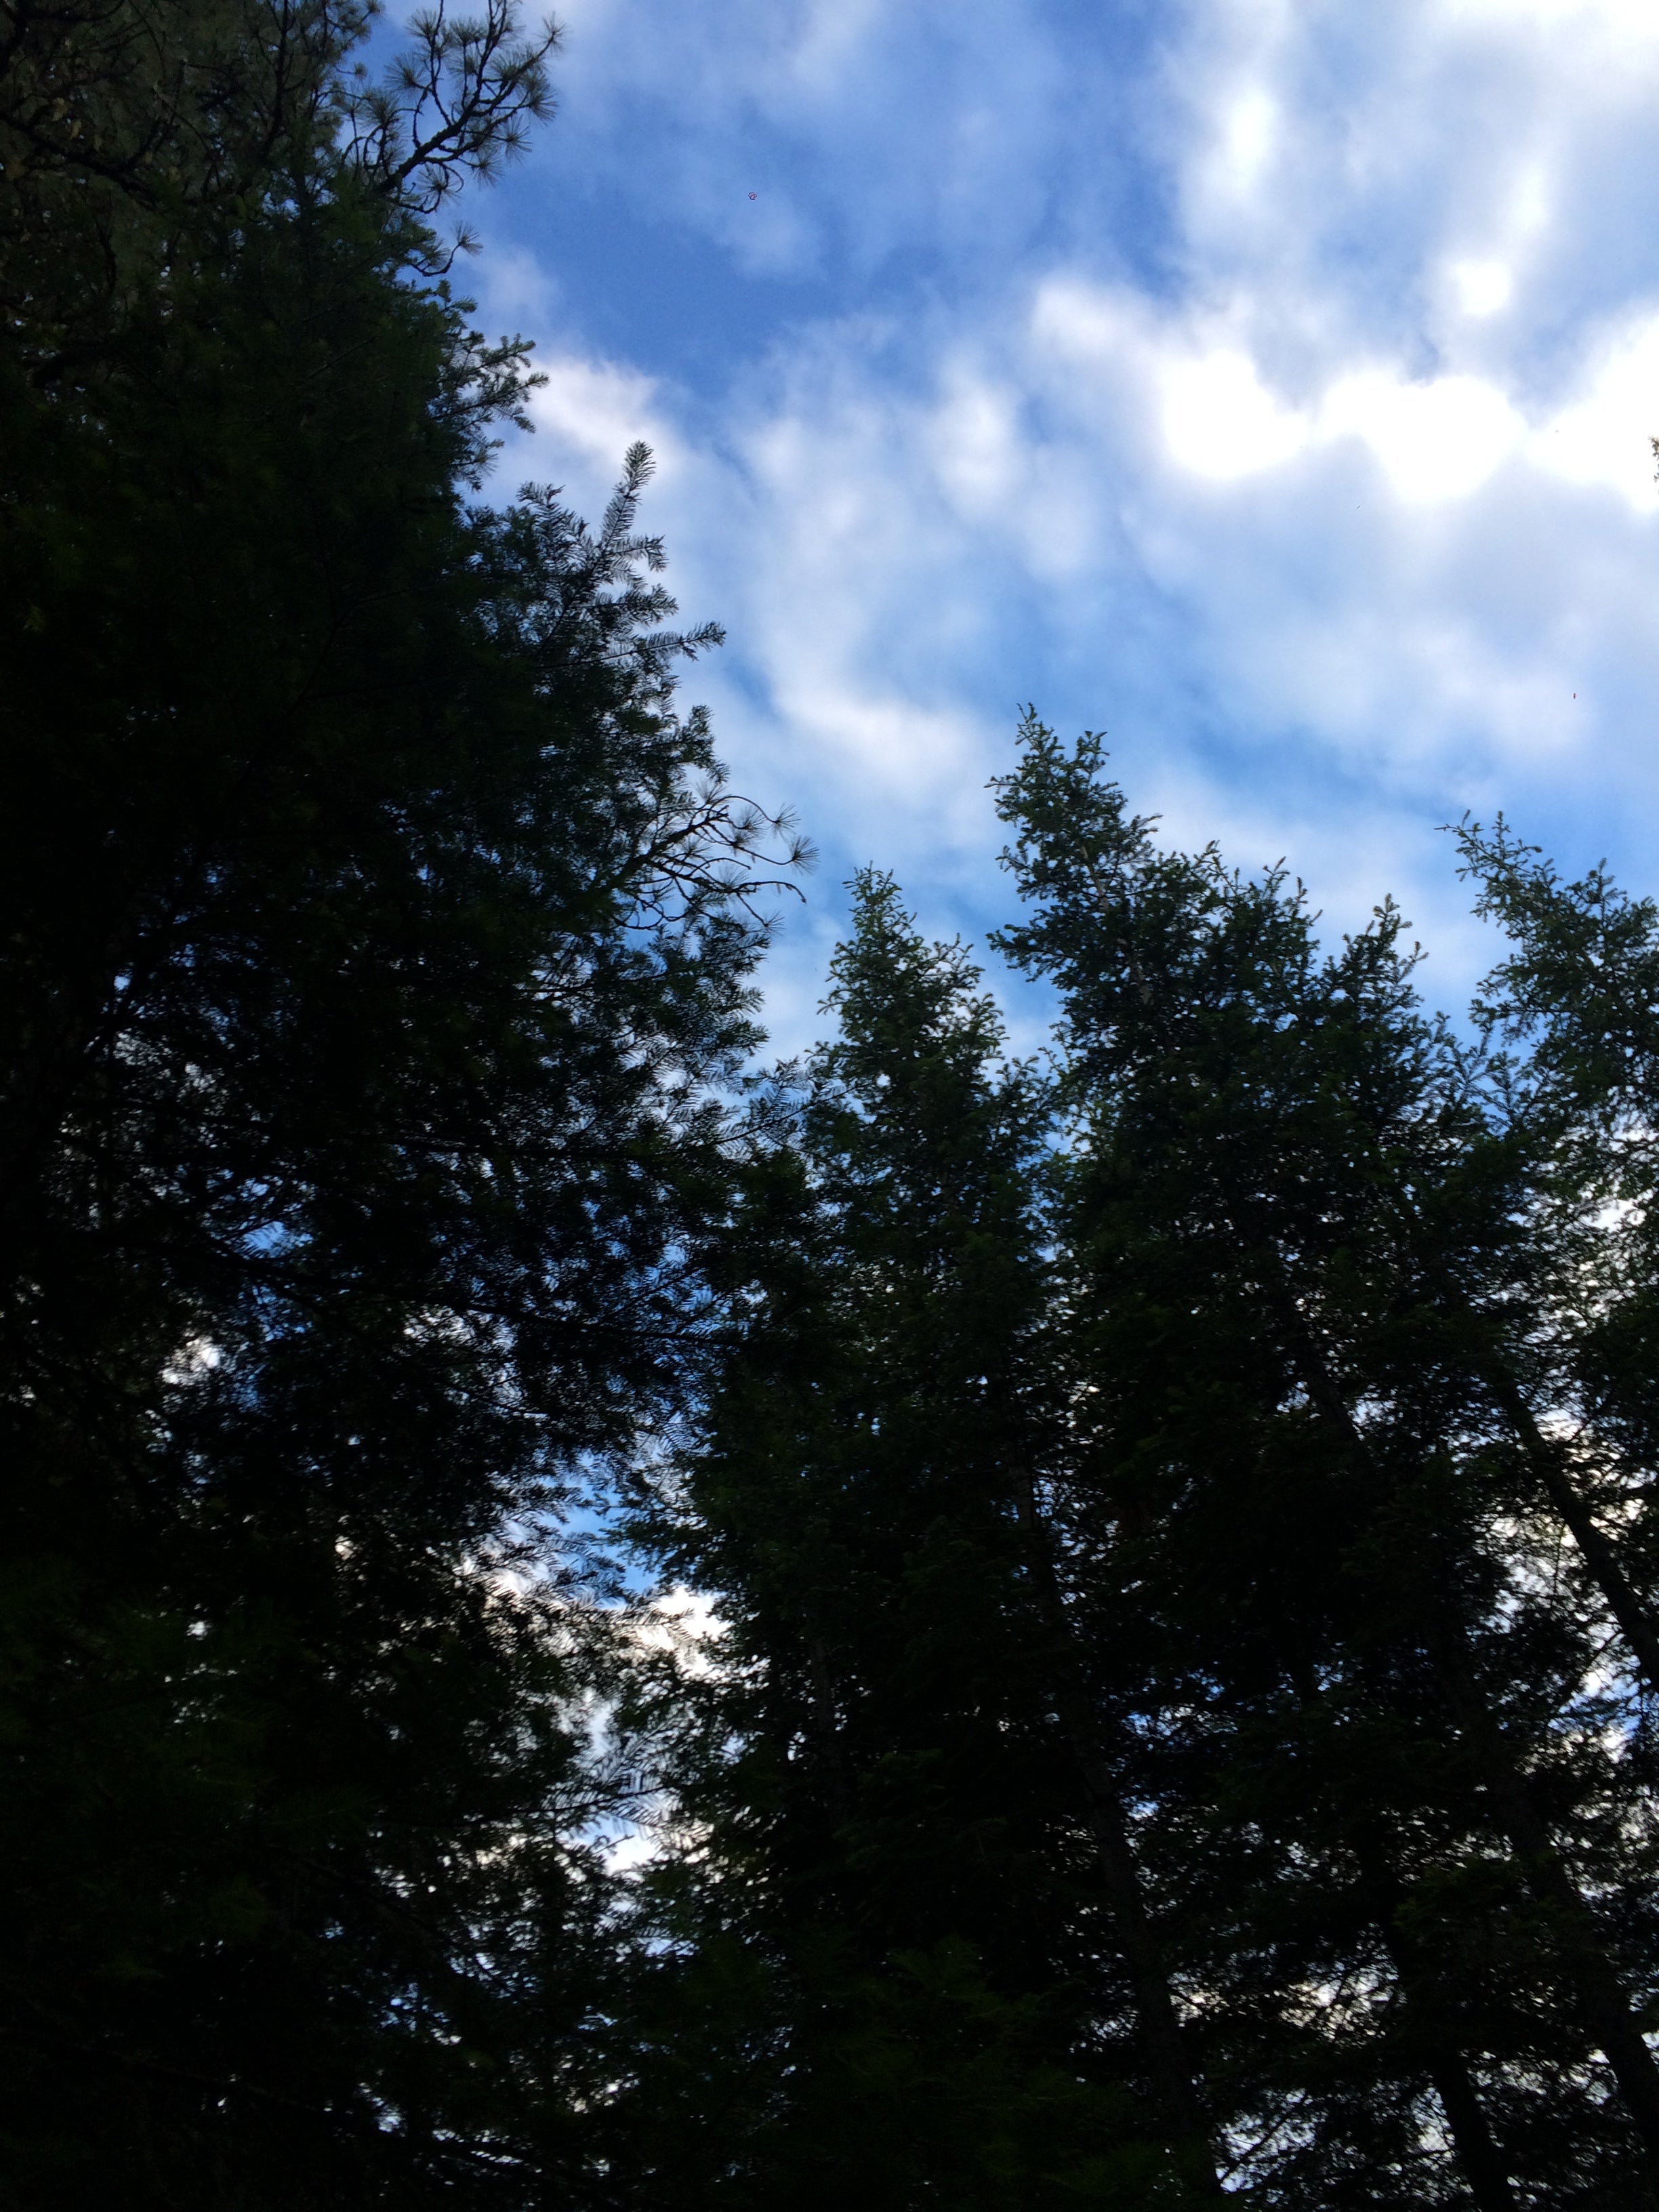 Image of a tree canopy against a blue sky.